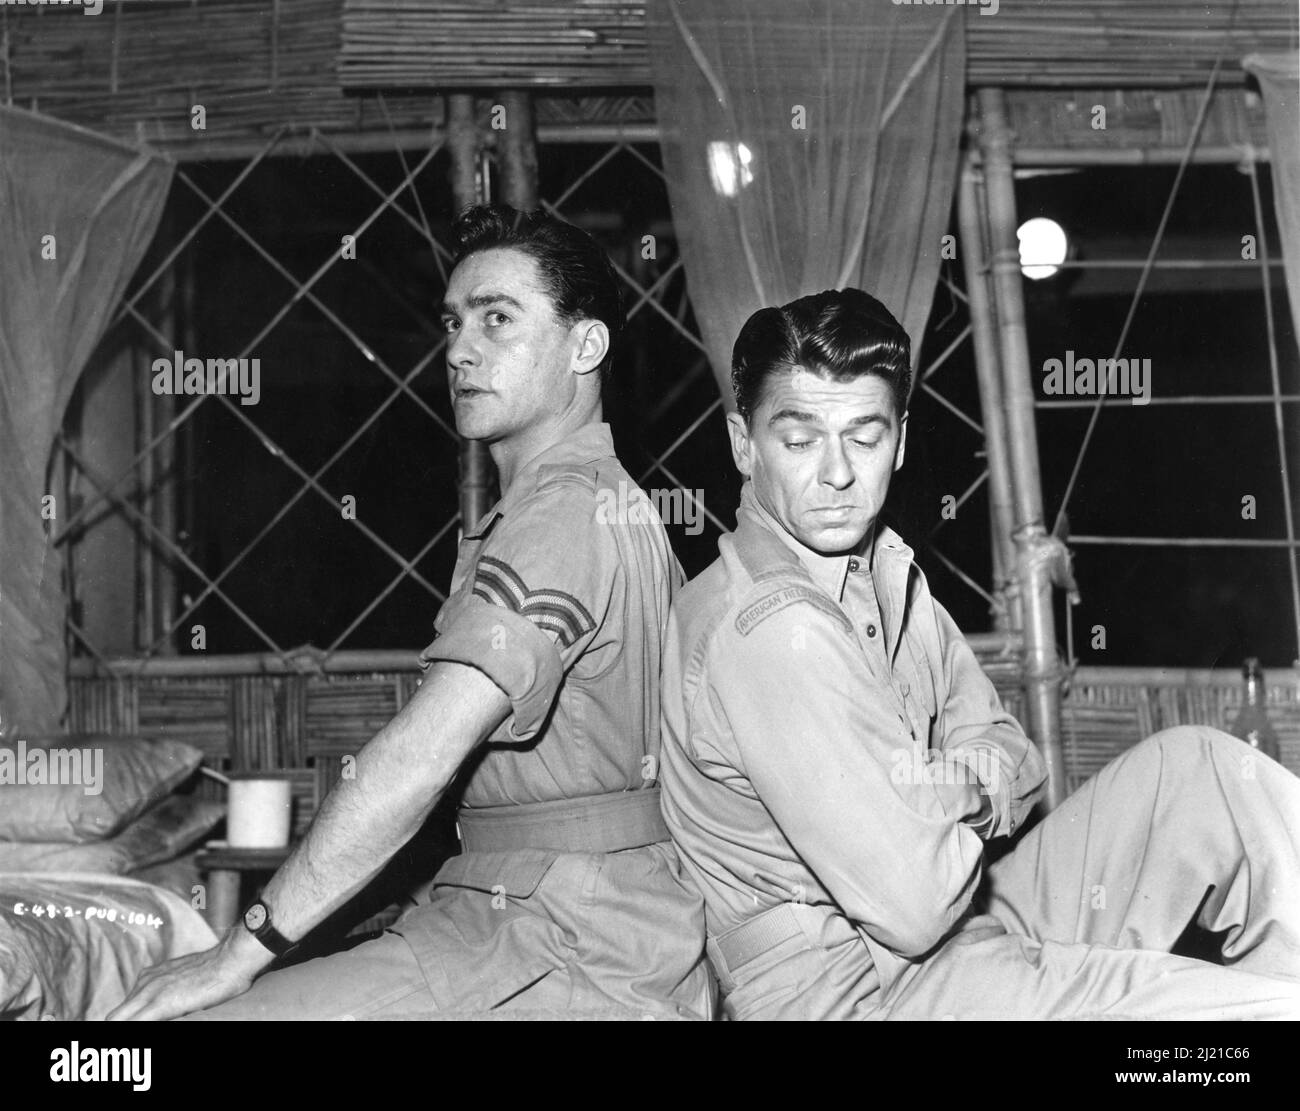 RICHARD TODD and RONALD REAGAN on set candid portrait at Elstree Studios during filming of THE HASTY HEART 1949 director VINCENT SHERMAN play John Patrick screenplay Ranald MacDougall Associated British Picture Corporation (BPC) / Warner Bros. Stock Photo